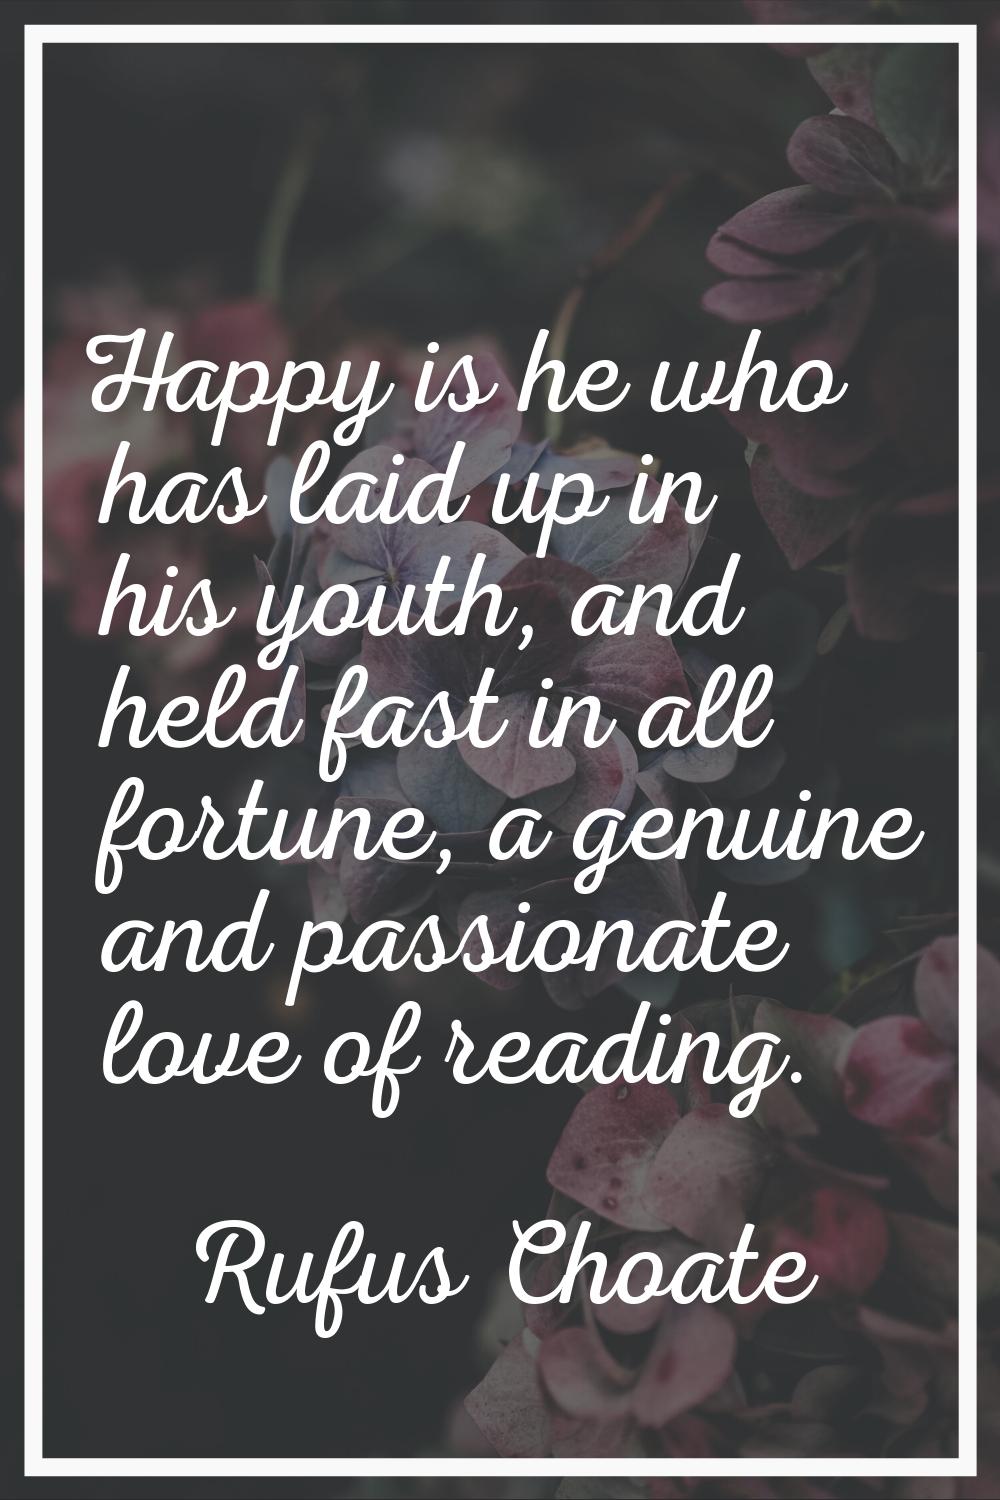 Happy is he who has laid up in his youth, and held fast in all fortune, a genuine and passionate lo